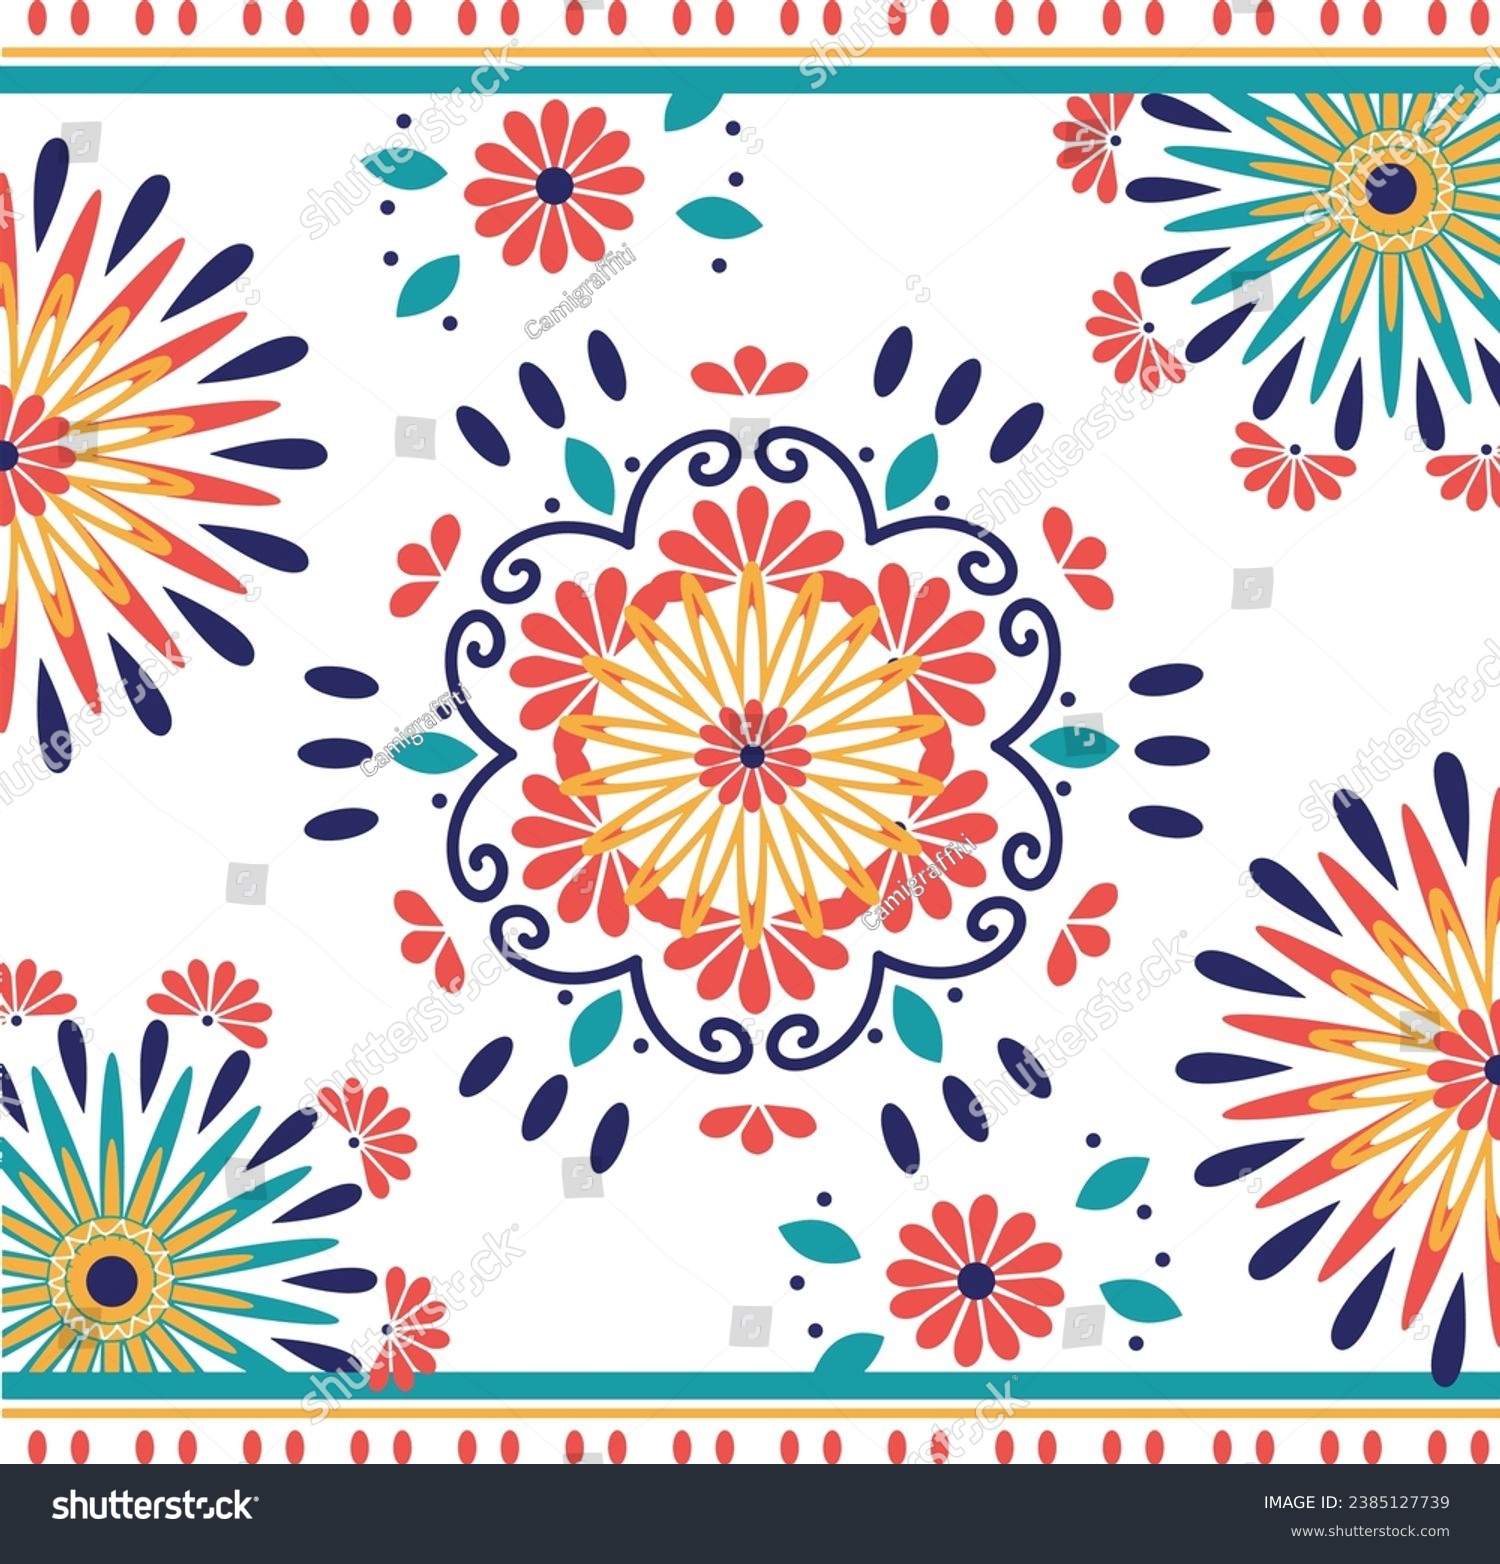 SVG of geometric ethnic decoration. Mexican, Navajo or Aztec fashion, Native American ornament. Colorful vector design element for image and border, textile, fabric or print on paper, ceramic svg